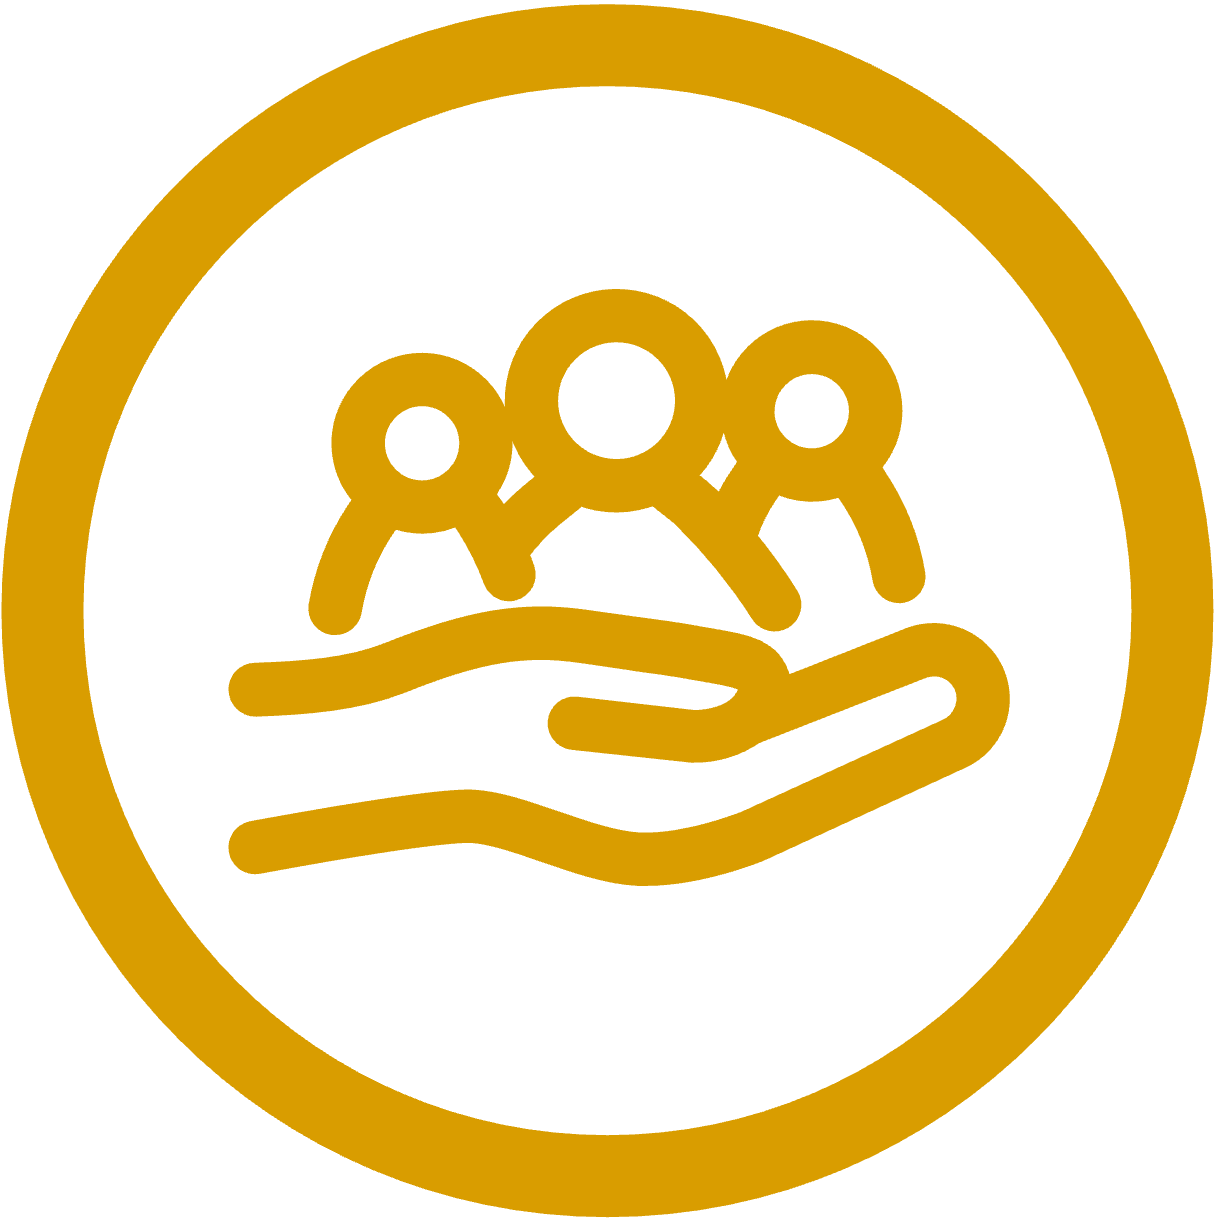 Icon of hand appearing to hold three people